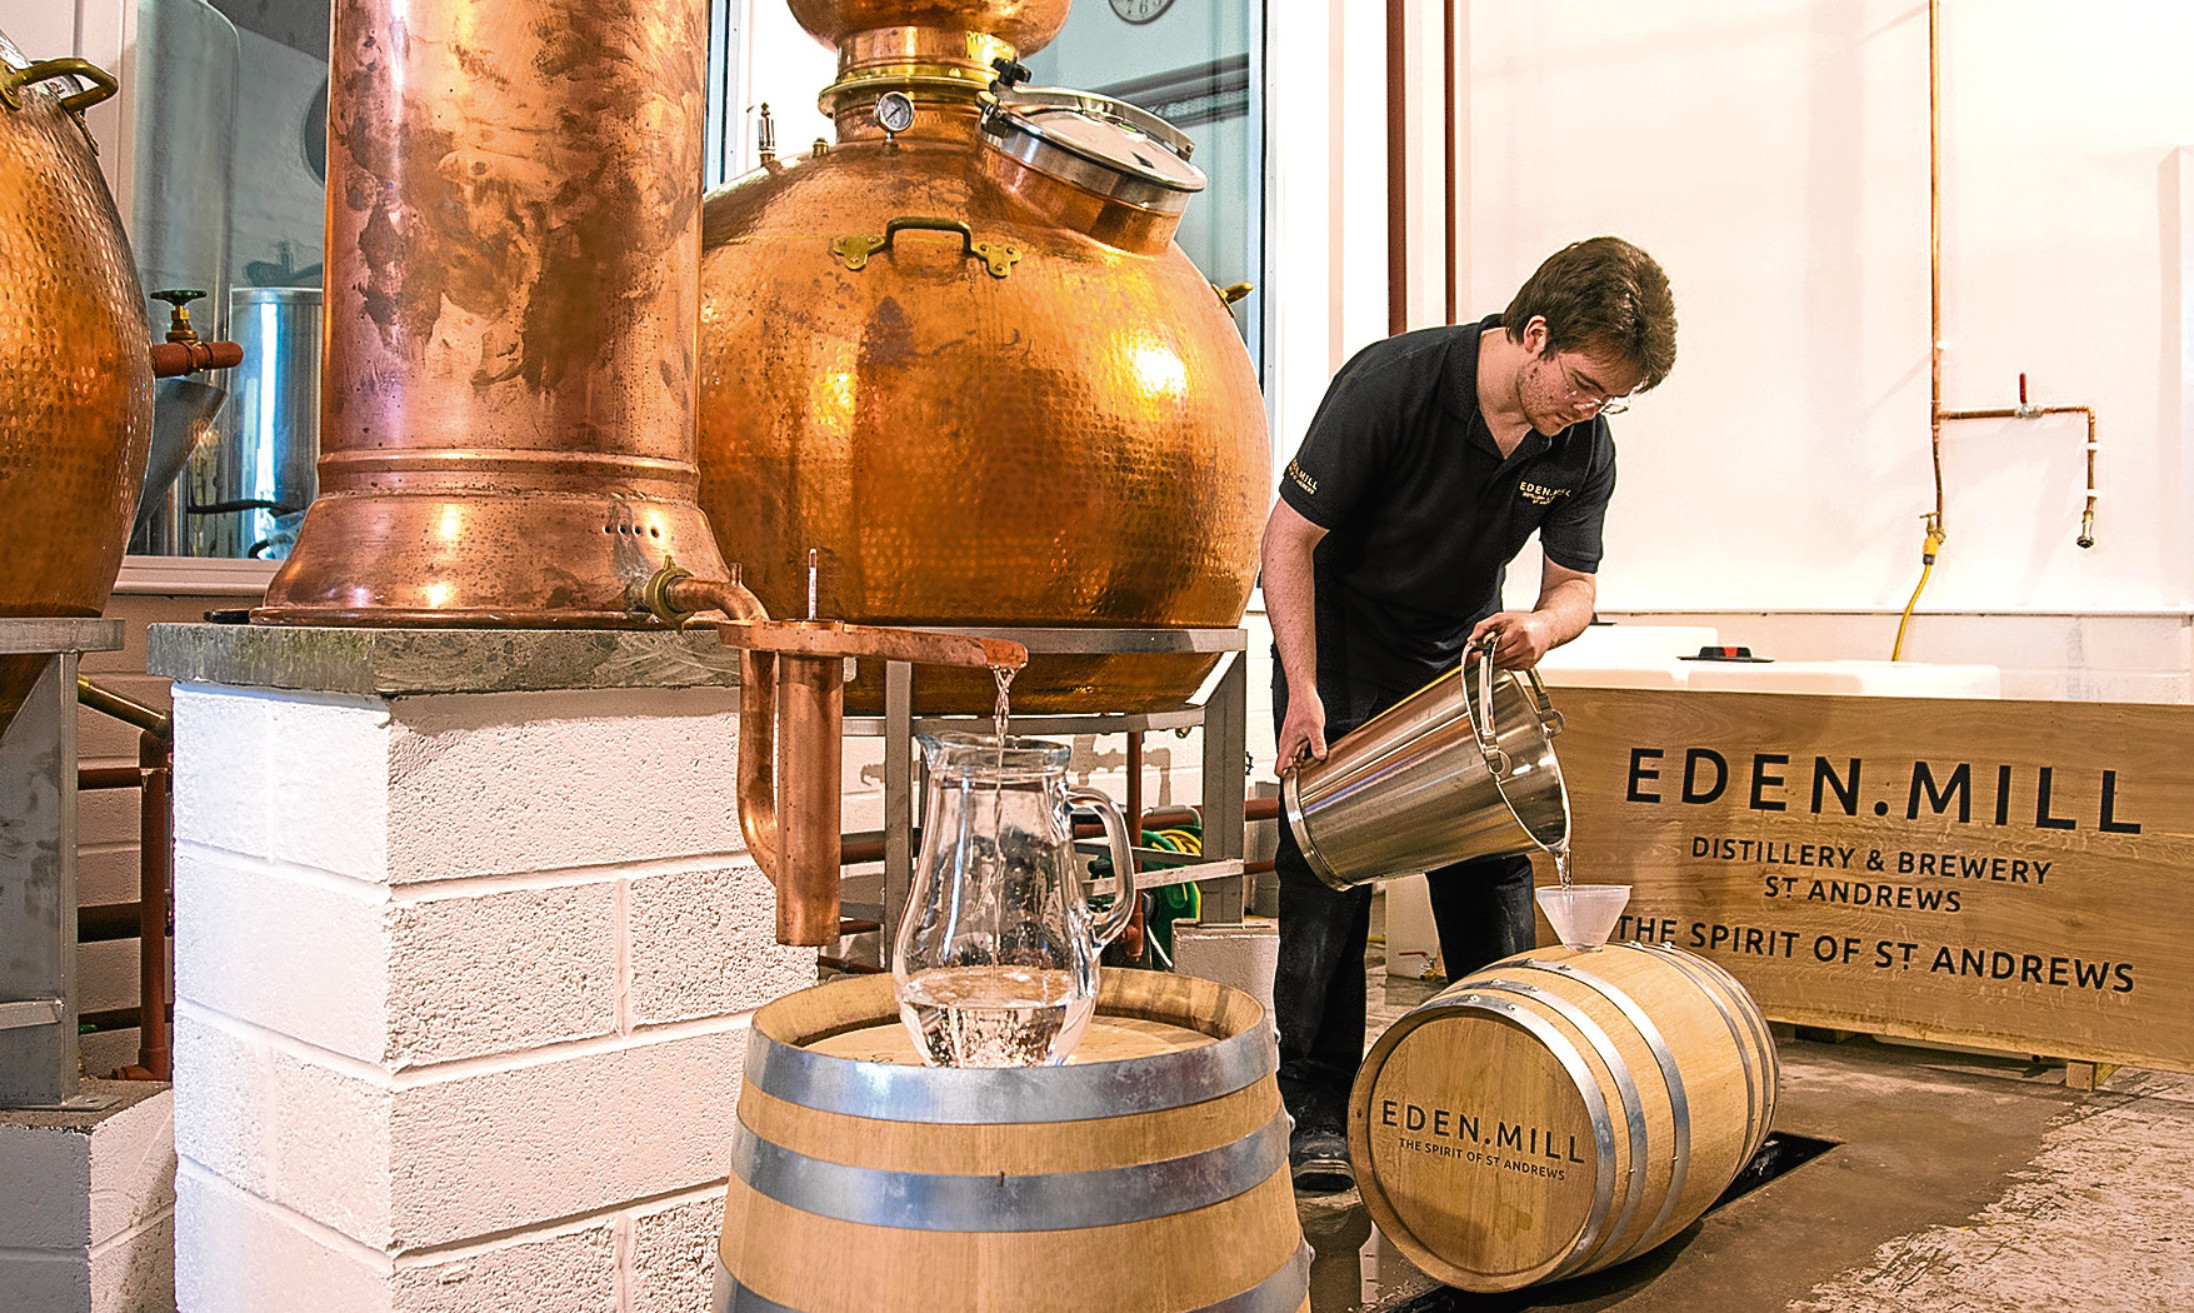 Eden Mill produces a range of drinks from craft beers to gin and whisky